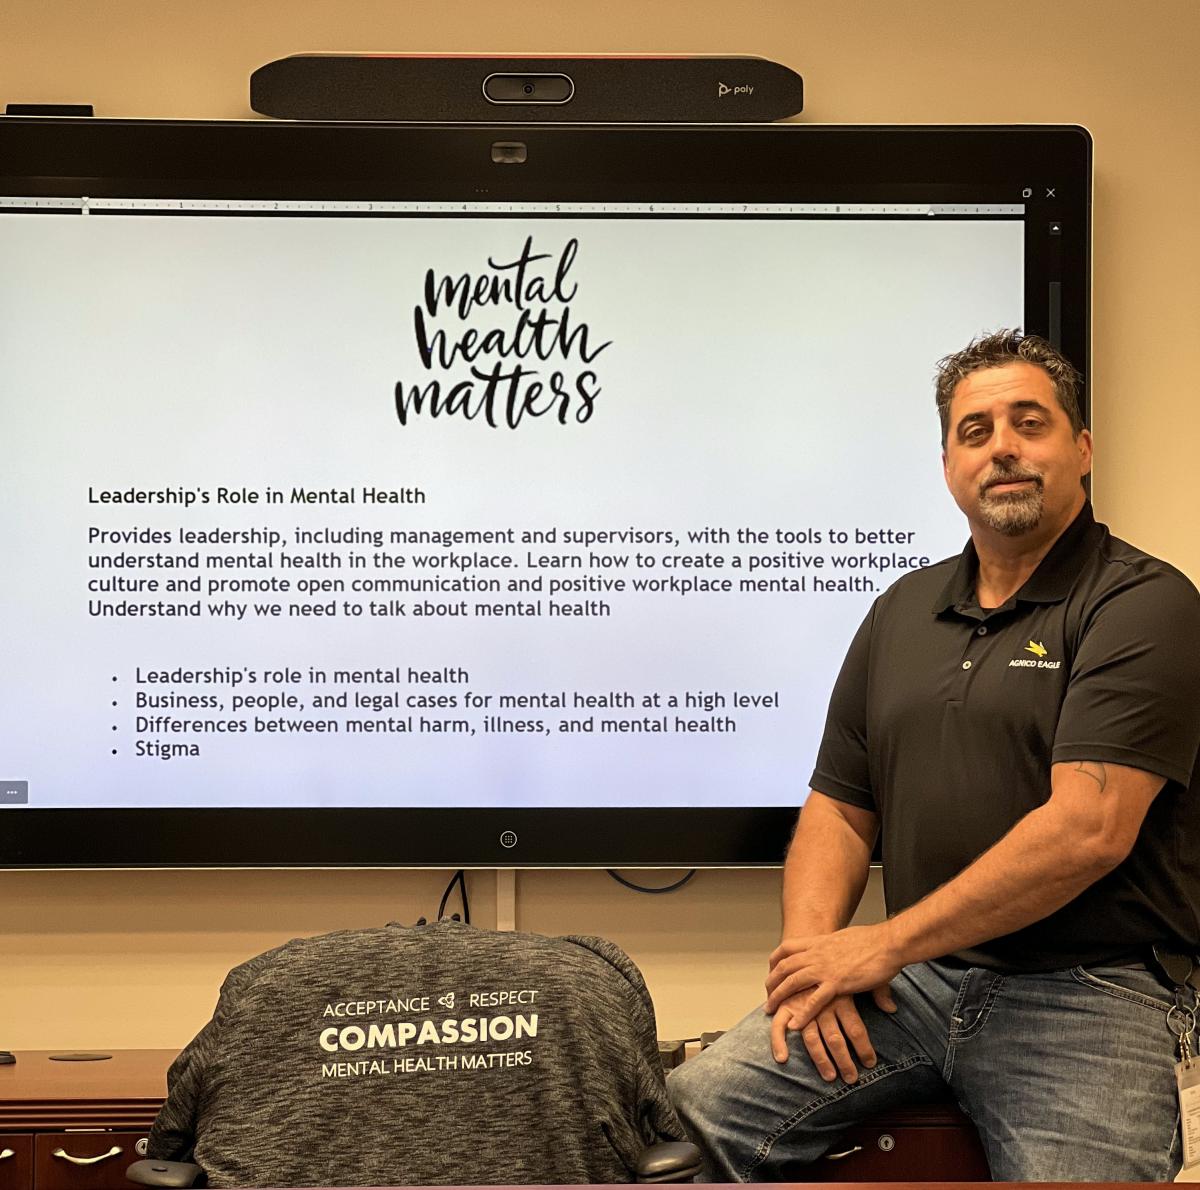 Dennis S sitting in front of large monitor with Mental Health Matters displayed on screen